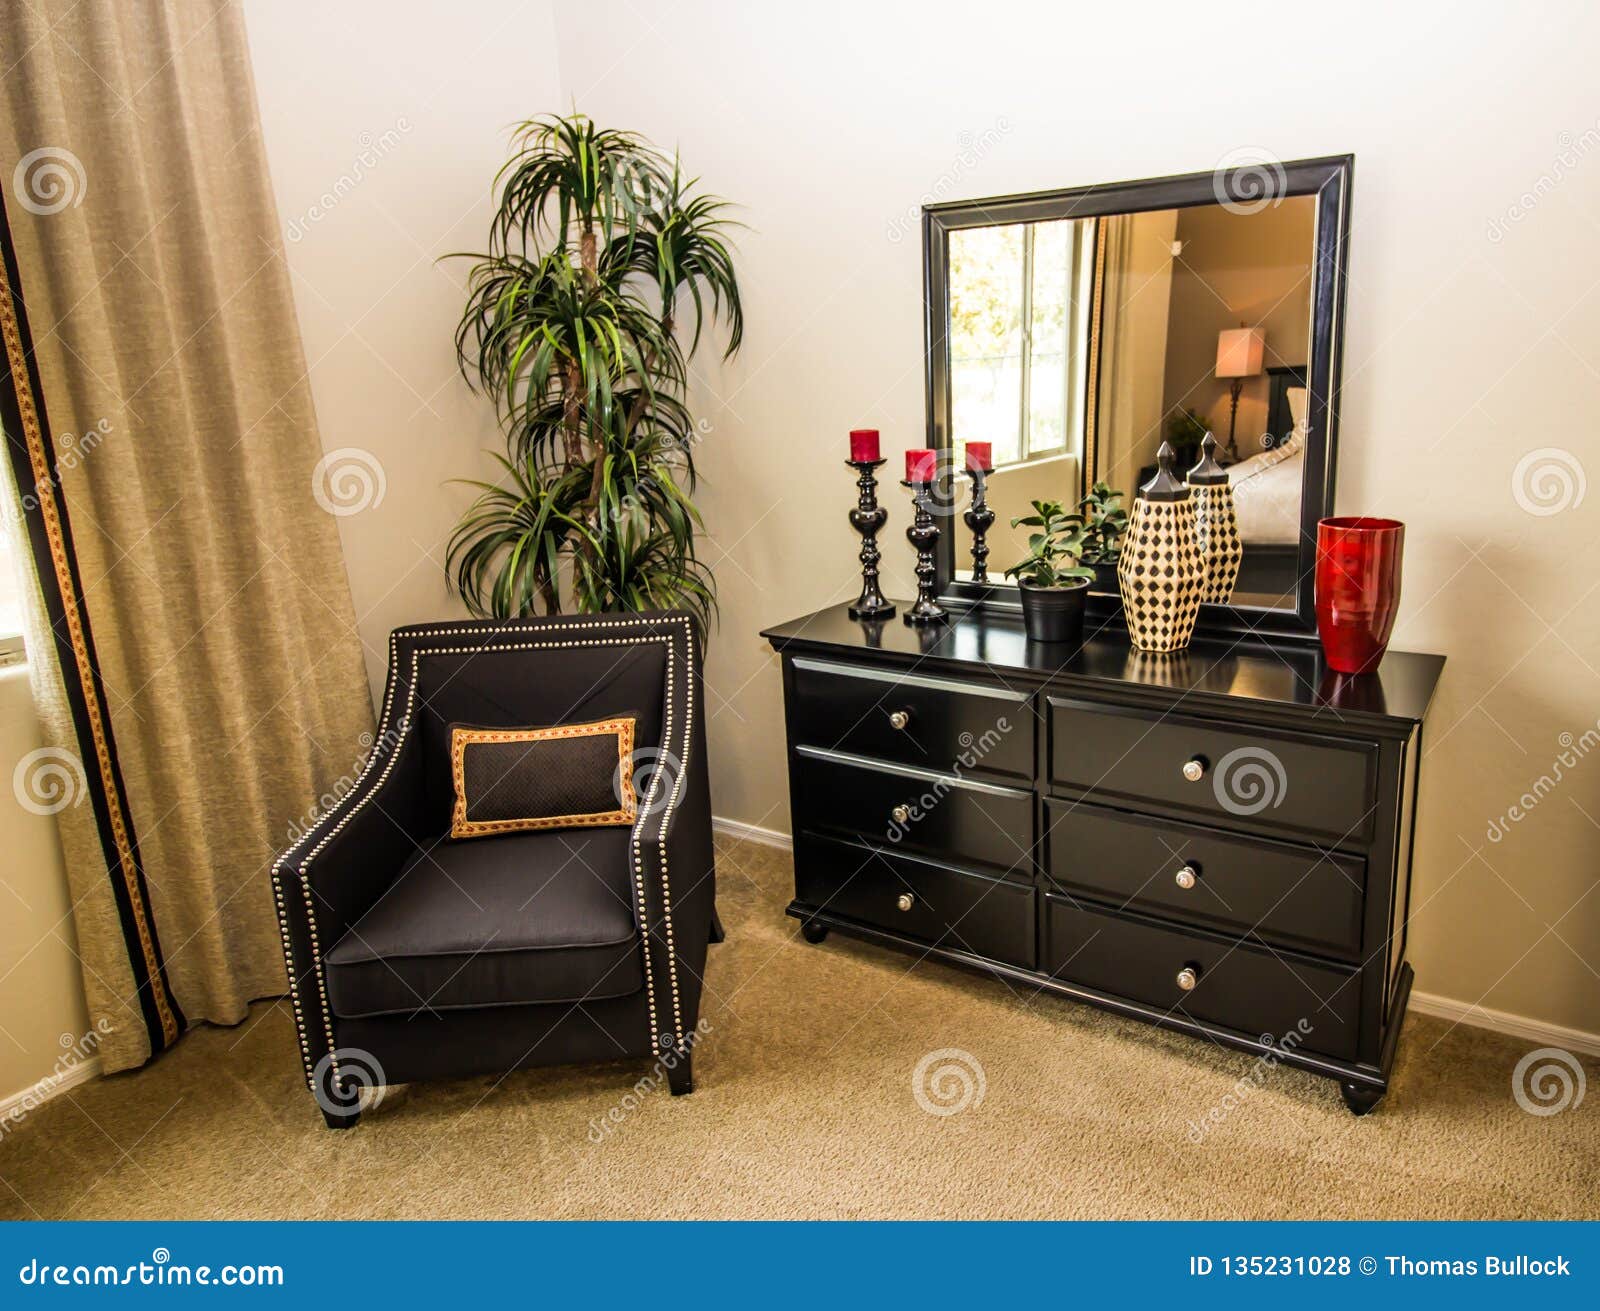 Spacious Bedroom With Dress And Chair Stock Photo Image Of Floor